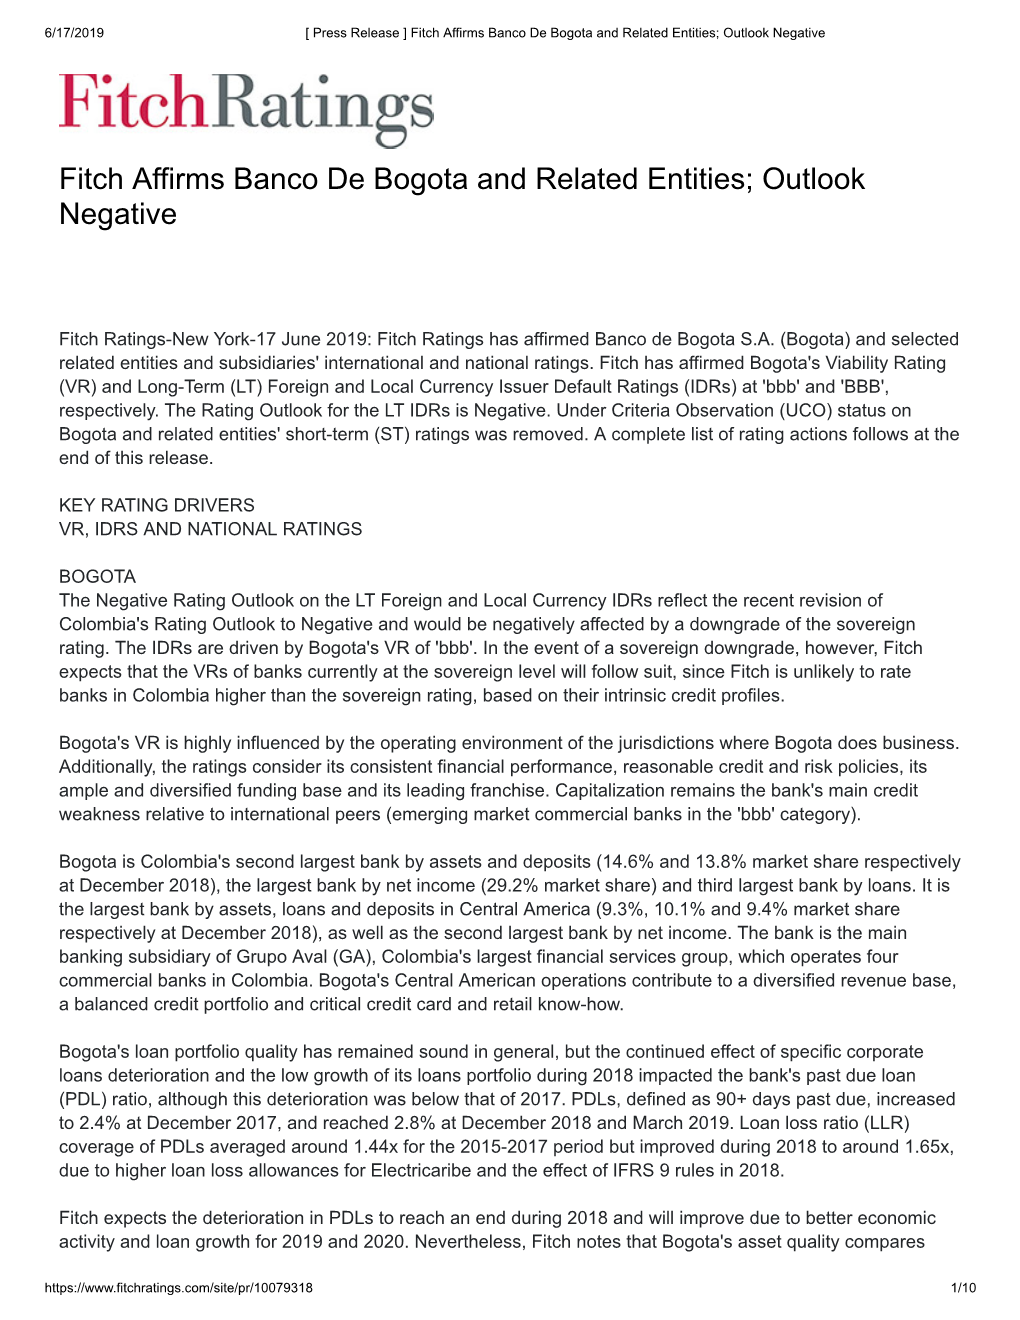 Fitch Affirms Banco De Bogota and Related Entities; Outlook Negative